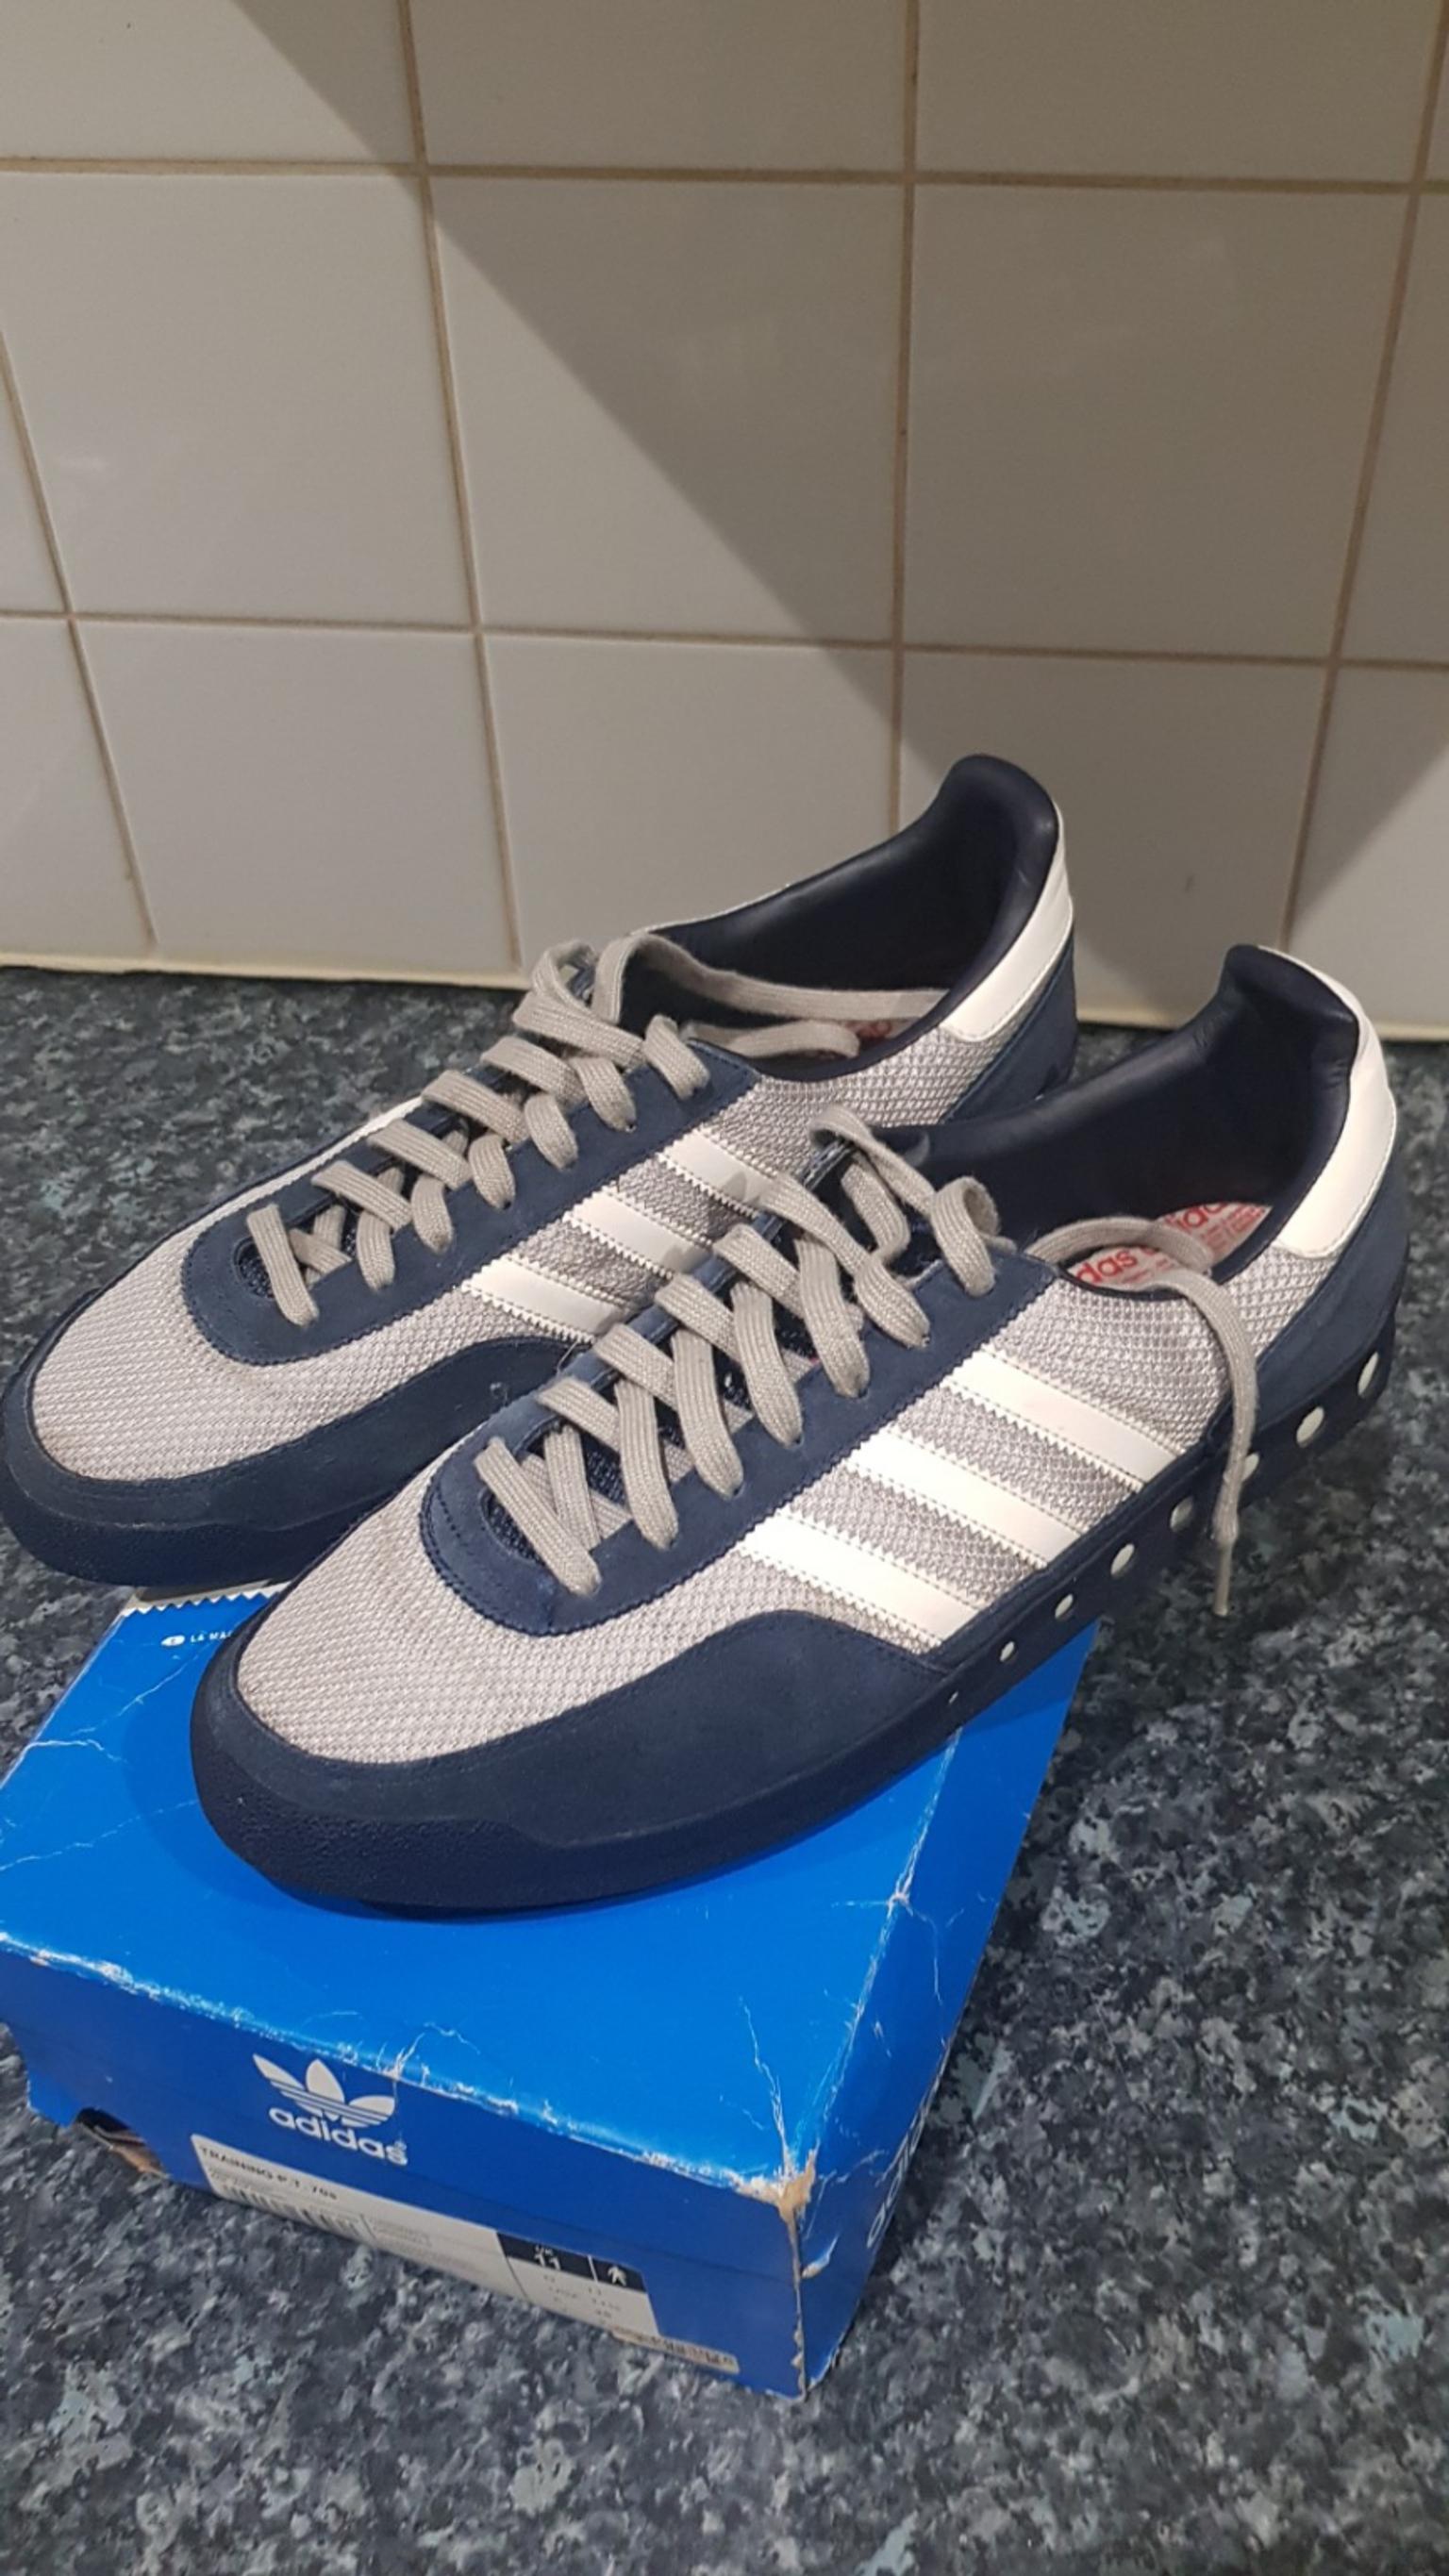 adidas pt trainers